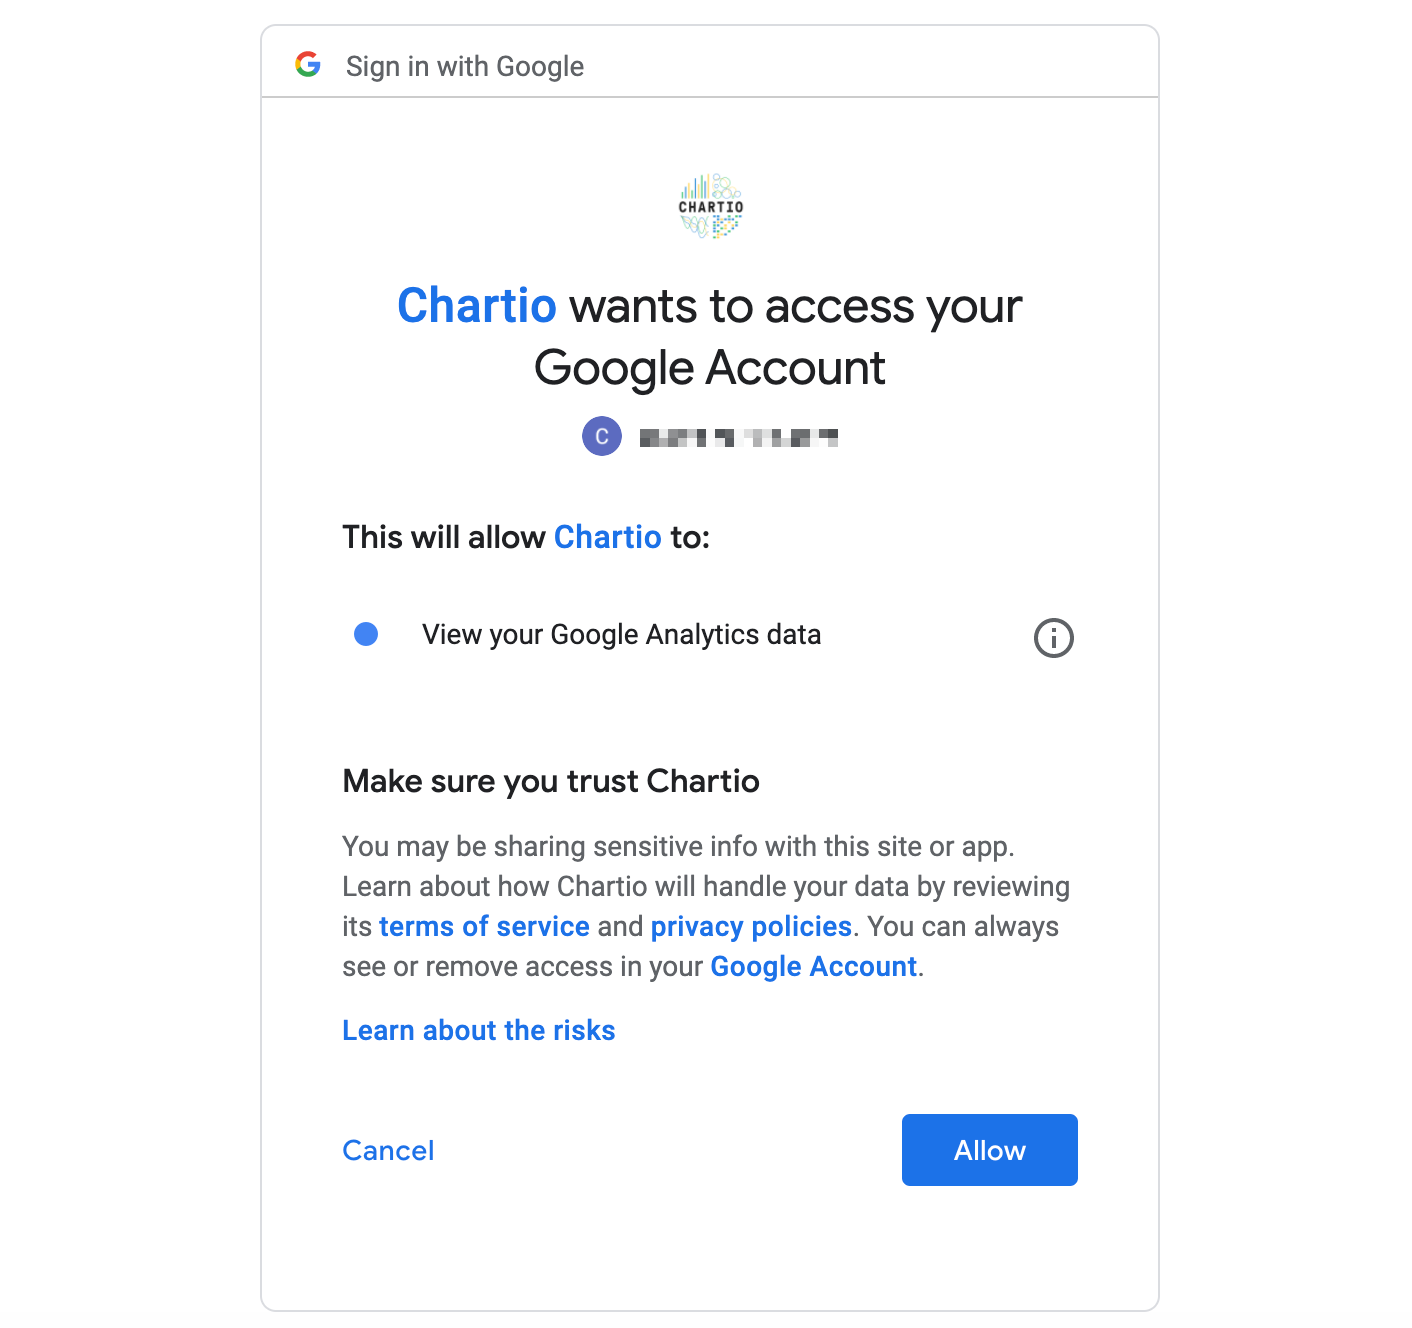 Click Allow when prompted by Google to give Chartio permission to access your Google Analytics data